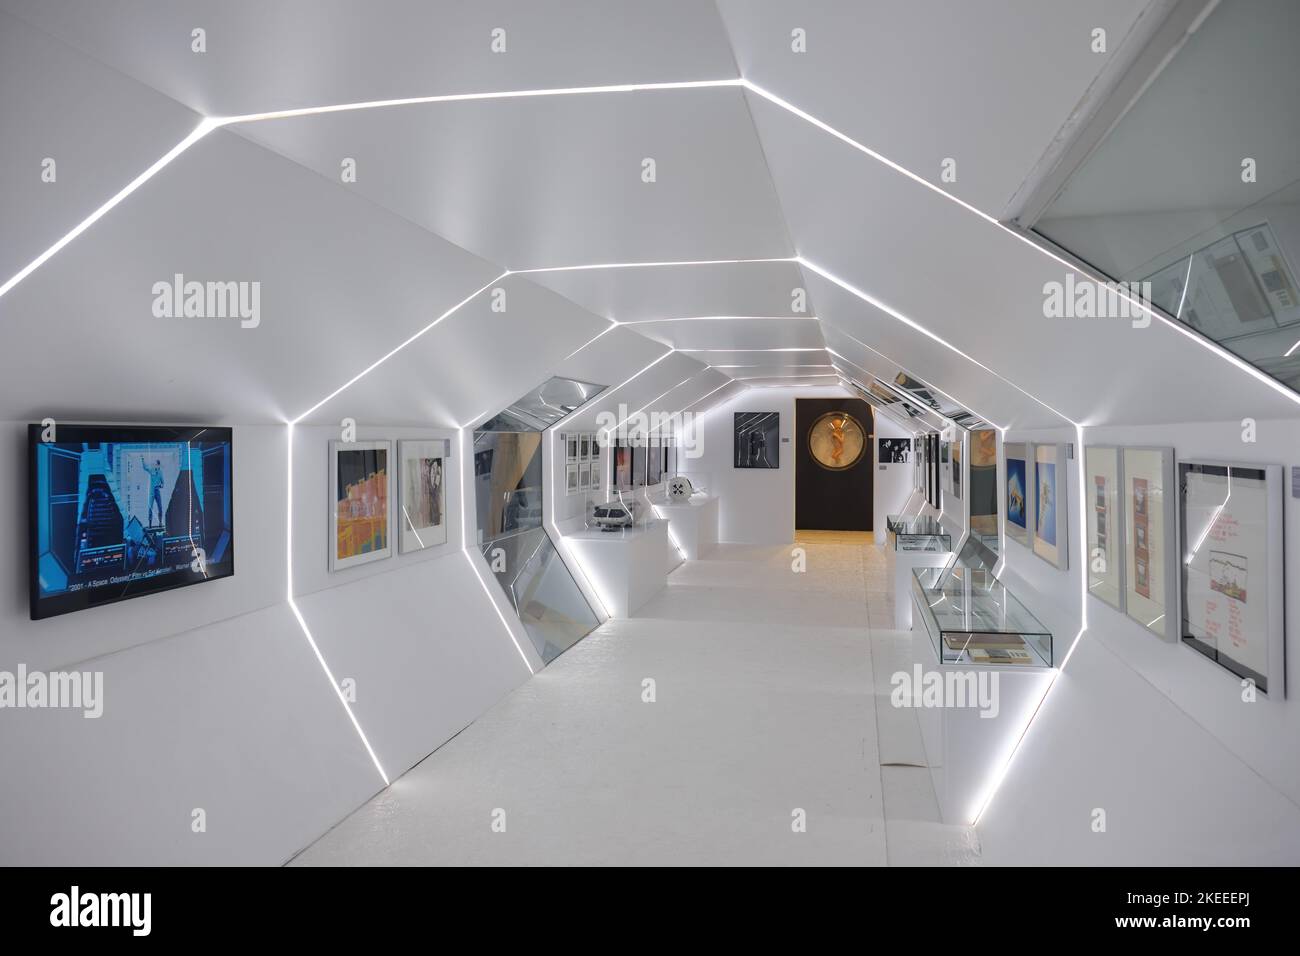 Upper floor of Istanbul Cinema Museum hosting Stanley Kubrick exhibition including materials from 2001: A Space Odyssey, cult science fiction classic. Stock Photo